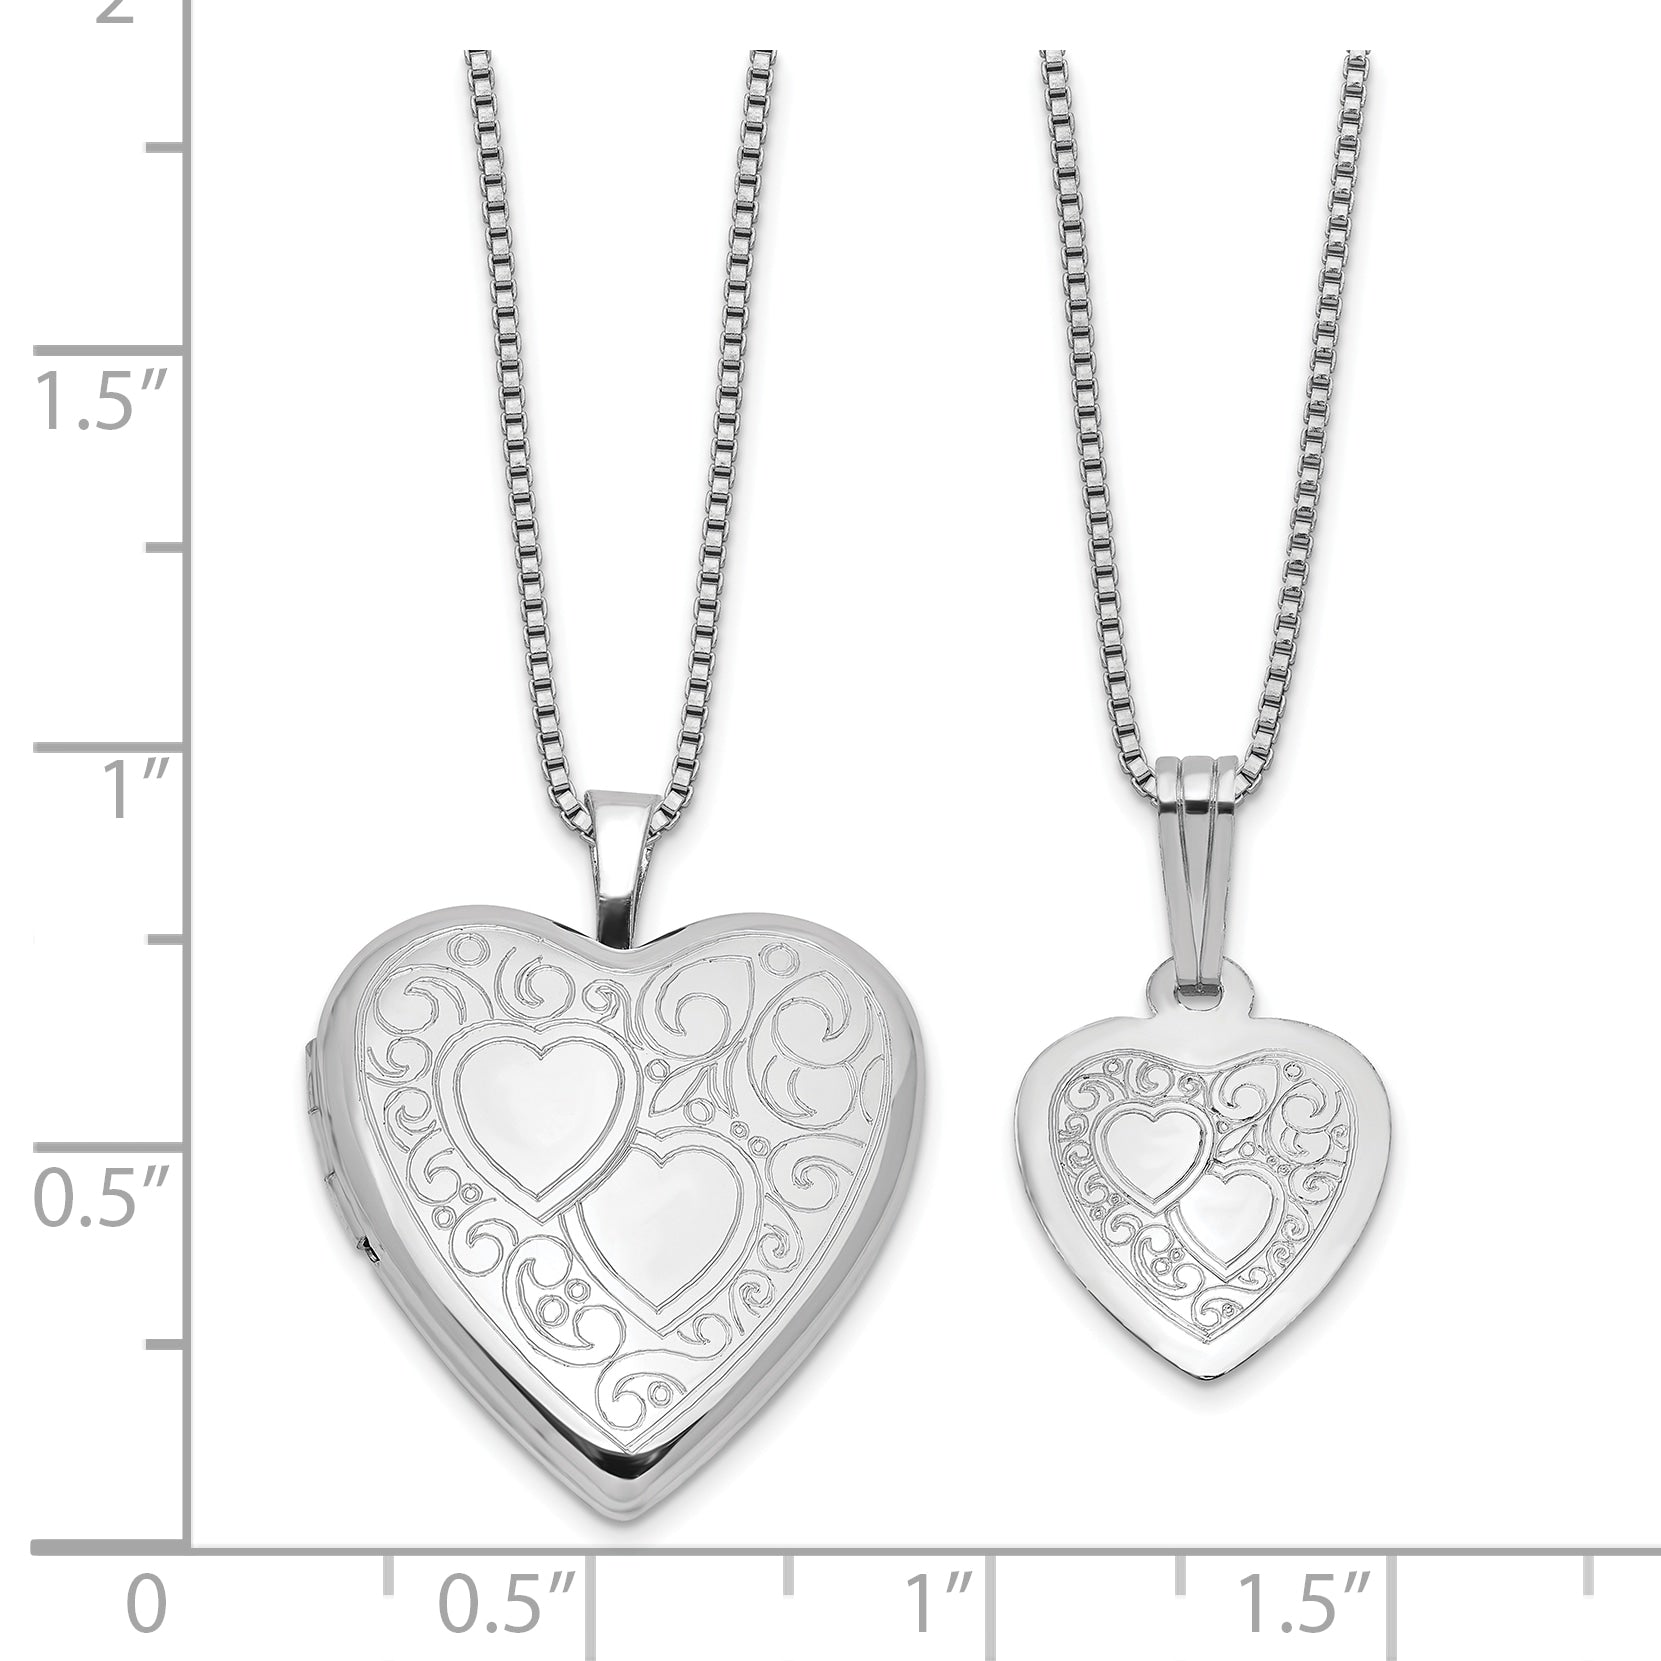 Sterling Silver Rh-plated Heart 20mm and 12mm Locket/Pendant Set